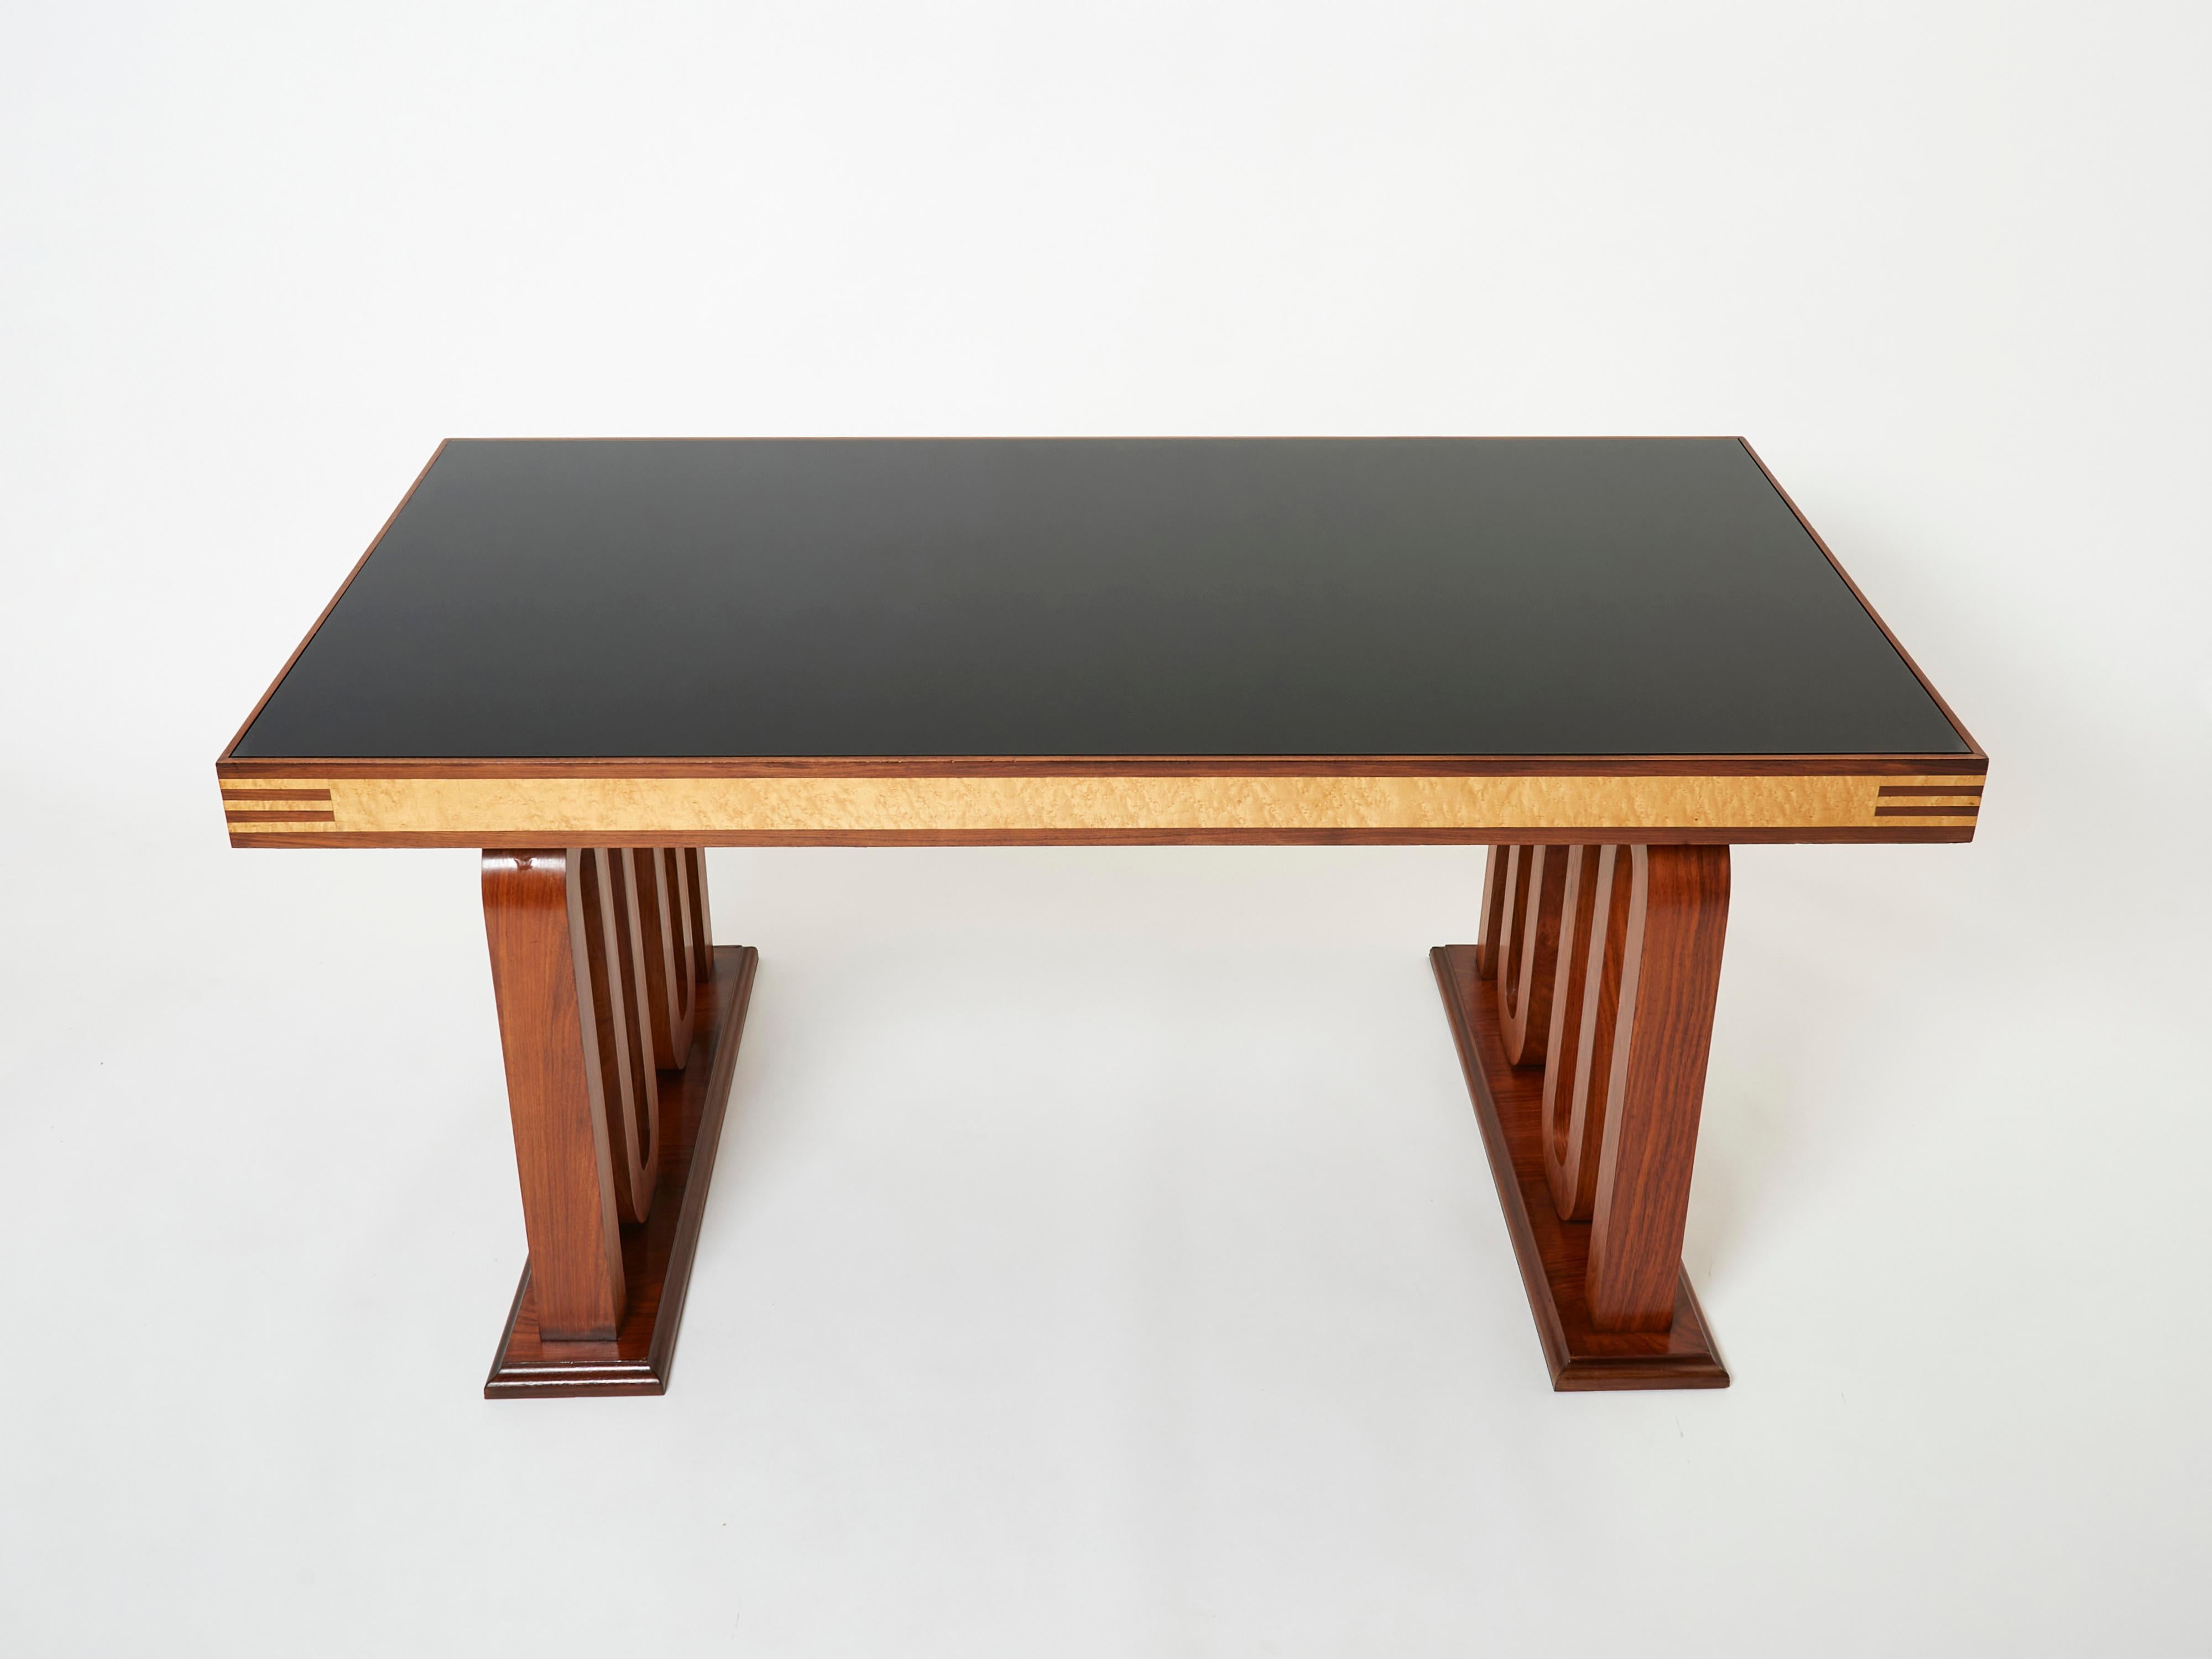 This beautiful desk table or dining table was designed by Paolo Buffa in Italy in the 1940s. The warm mix of rosewood and birdseye maple remains looking healthy and smooth eighty plus years later. The waving shaped feet is really a beautiful work.